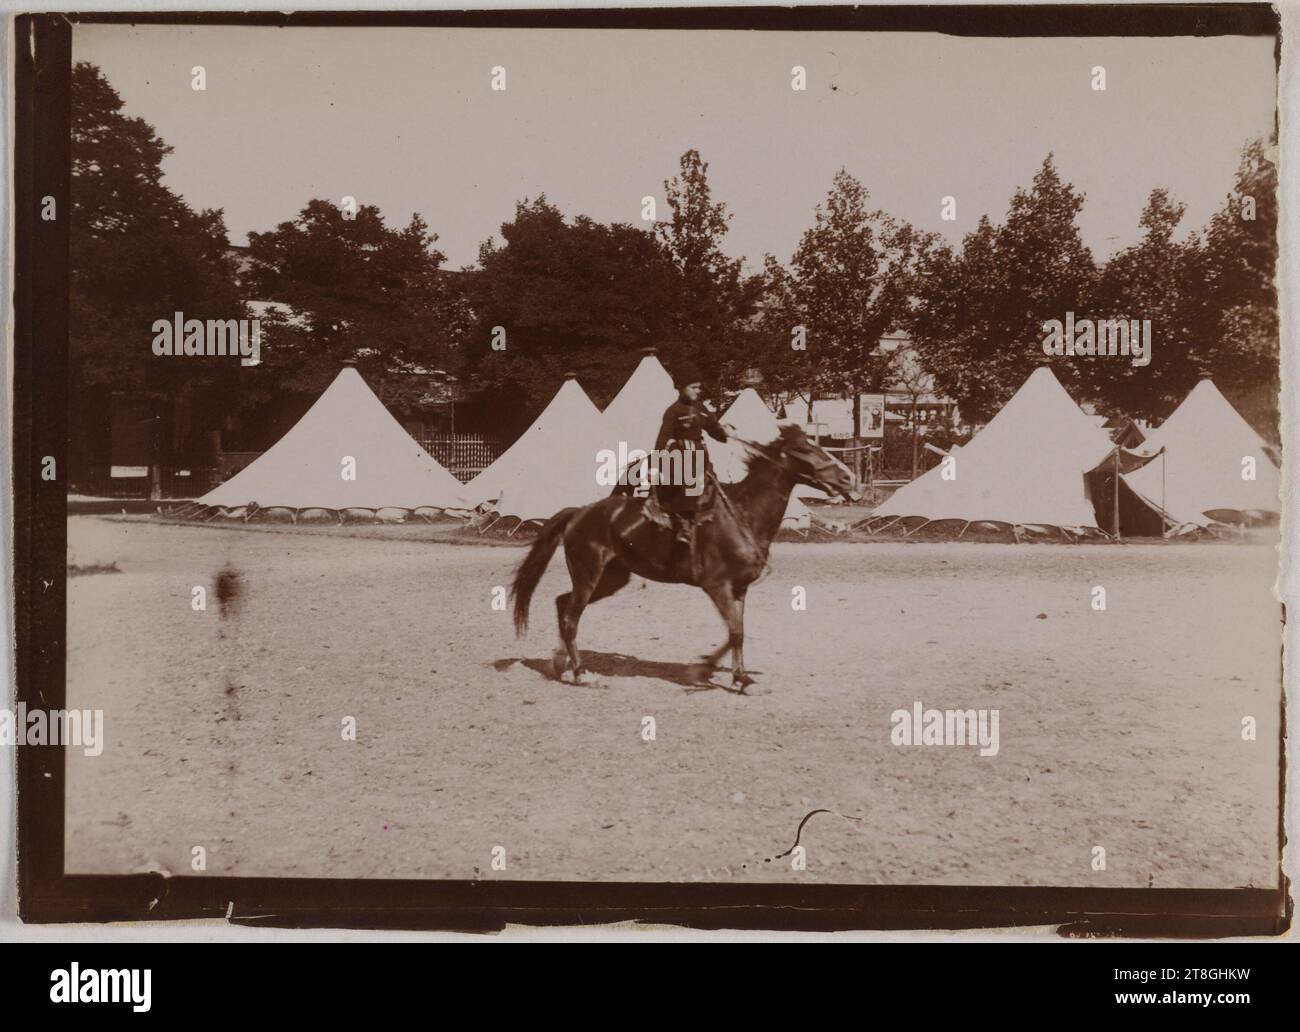 Tents and Russian Horseman ?, Lappish Encampment Recreated for the 1900 World's Fair, Paris, Photographer, In 1900, 19th-20th century, Photography, Graphic Arts, Photography, Developed gelatin silver chloride print, Dimensions - Image:, Height: 6 cm, Width: 8.6 cm, Dimensions - Margin:, Height: 6.4 cm, Width: 9 cm Stock Photo